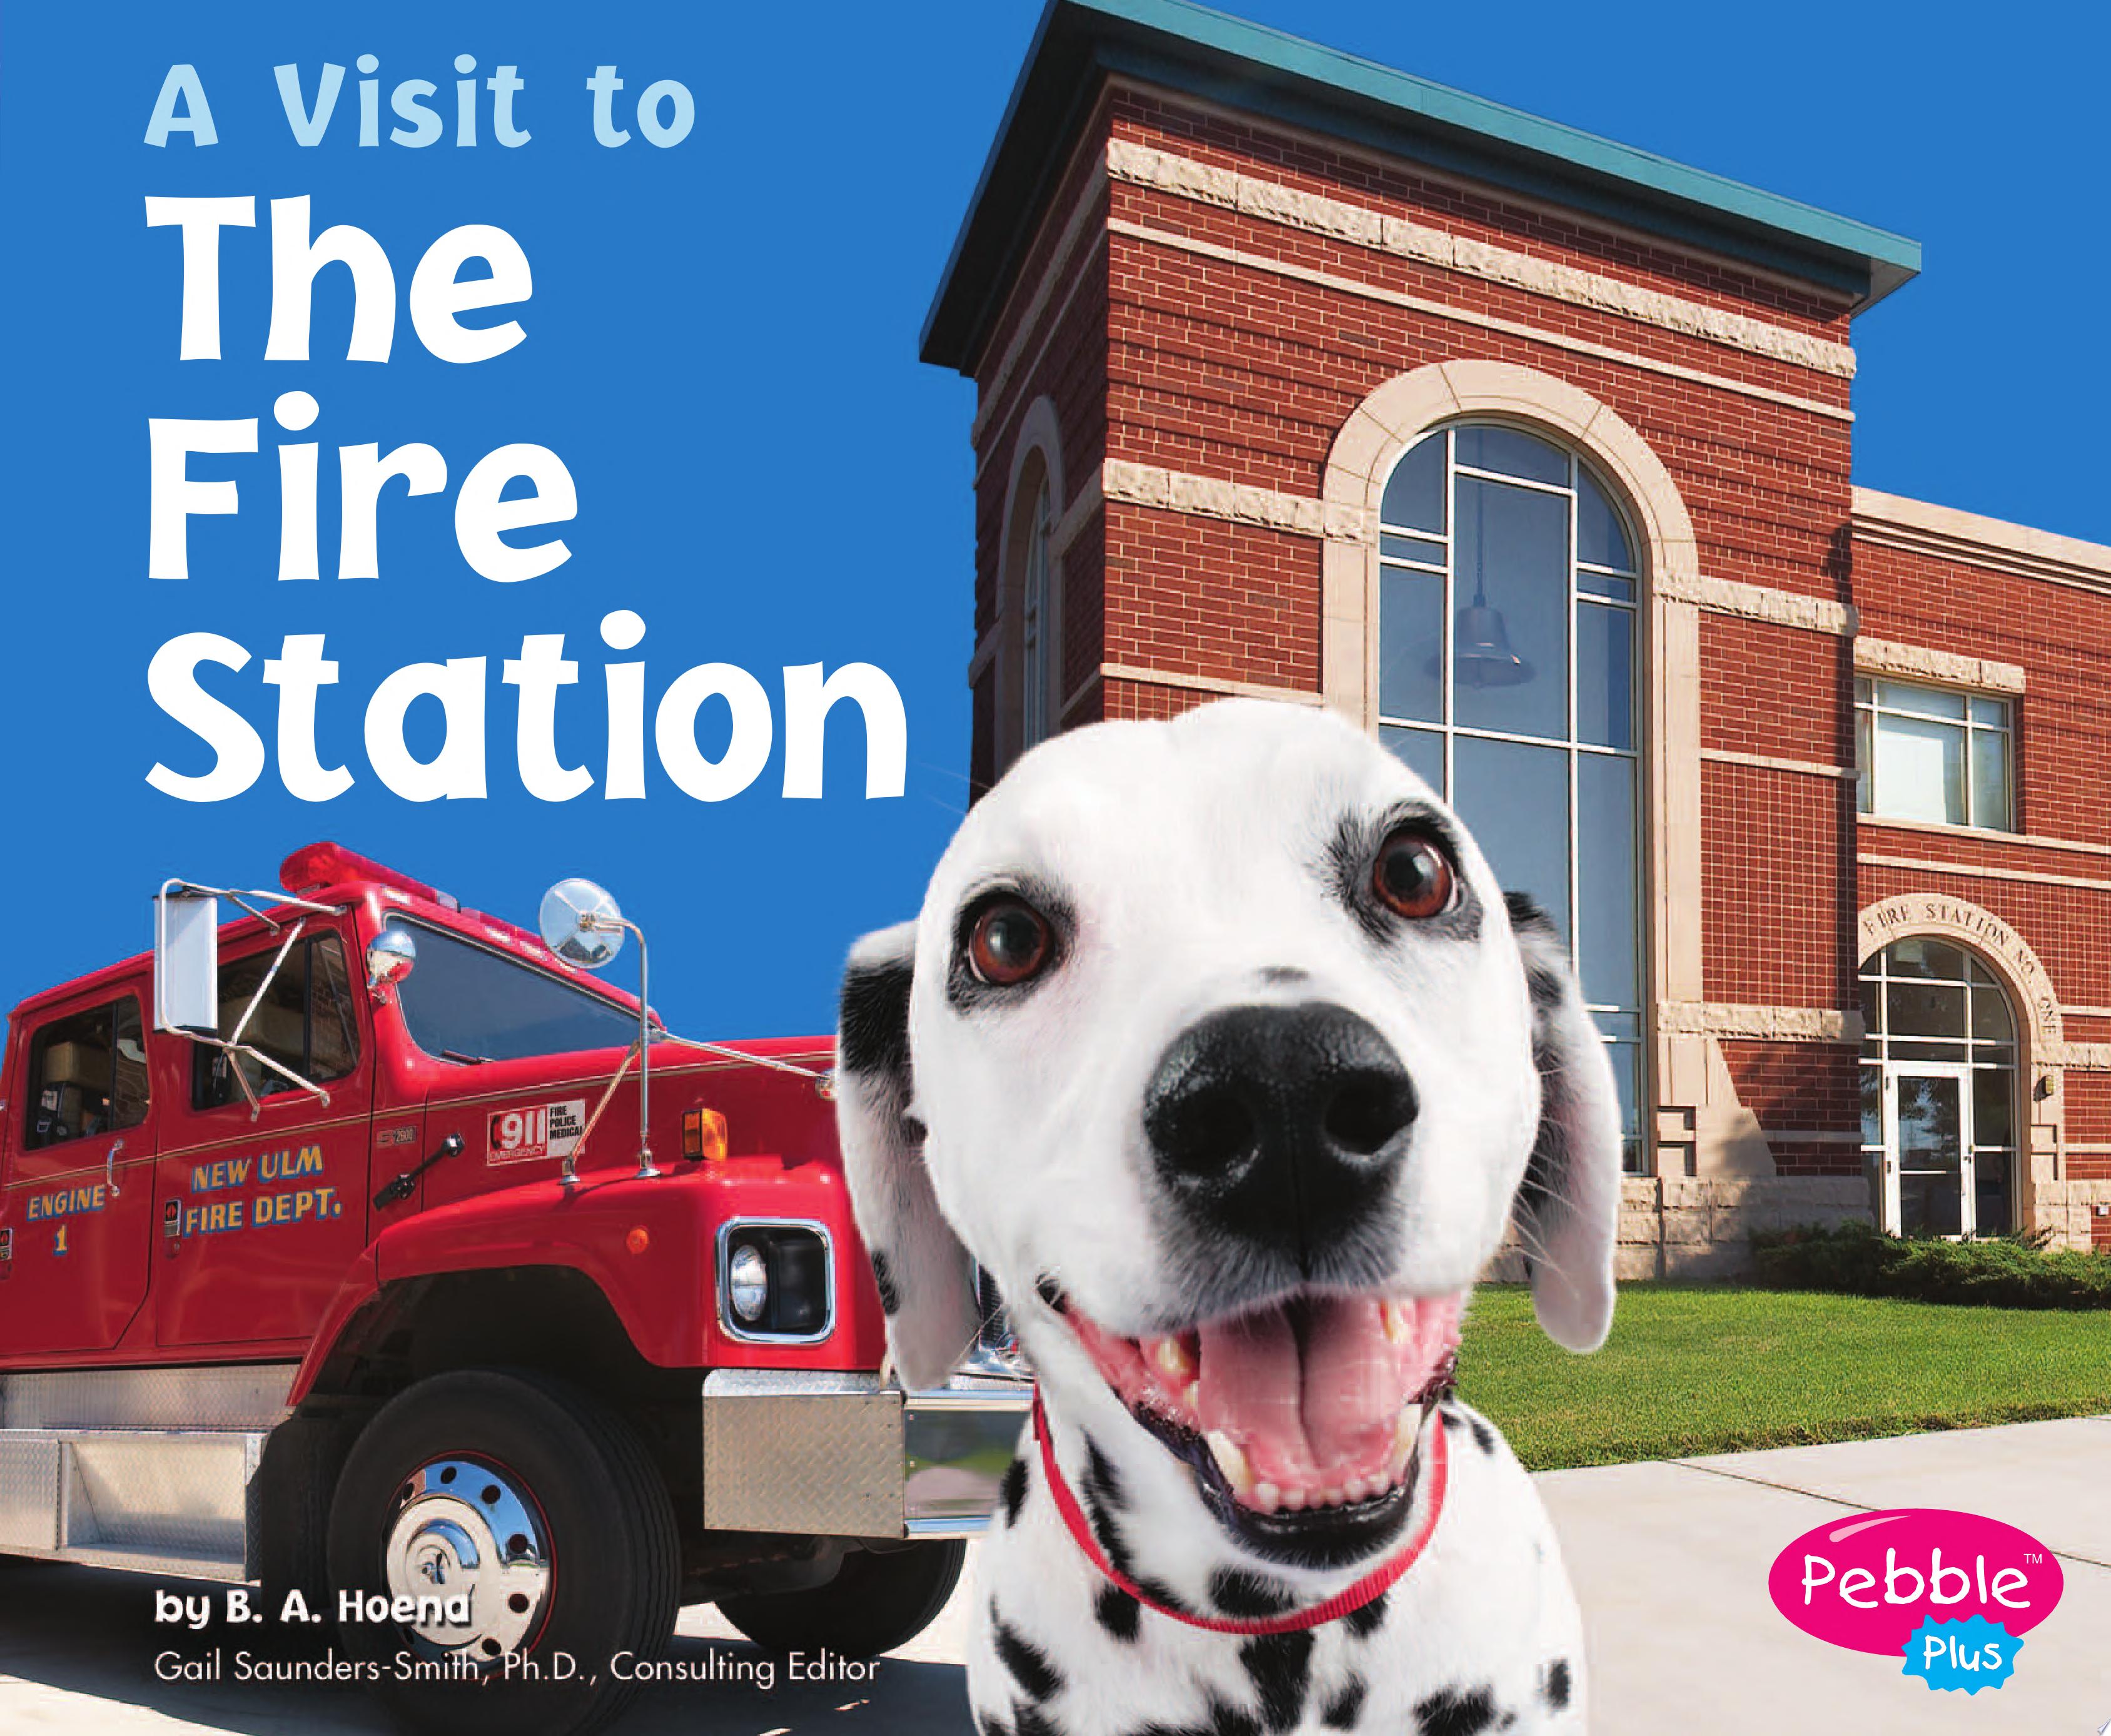 Image for "The Fire Station"